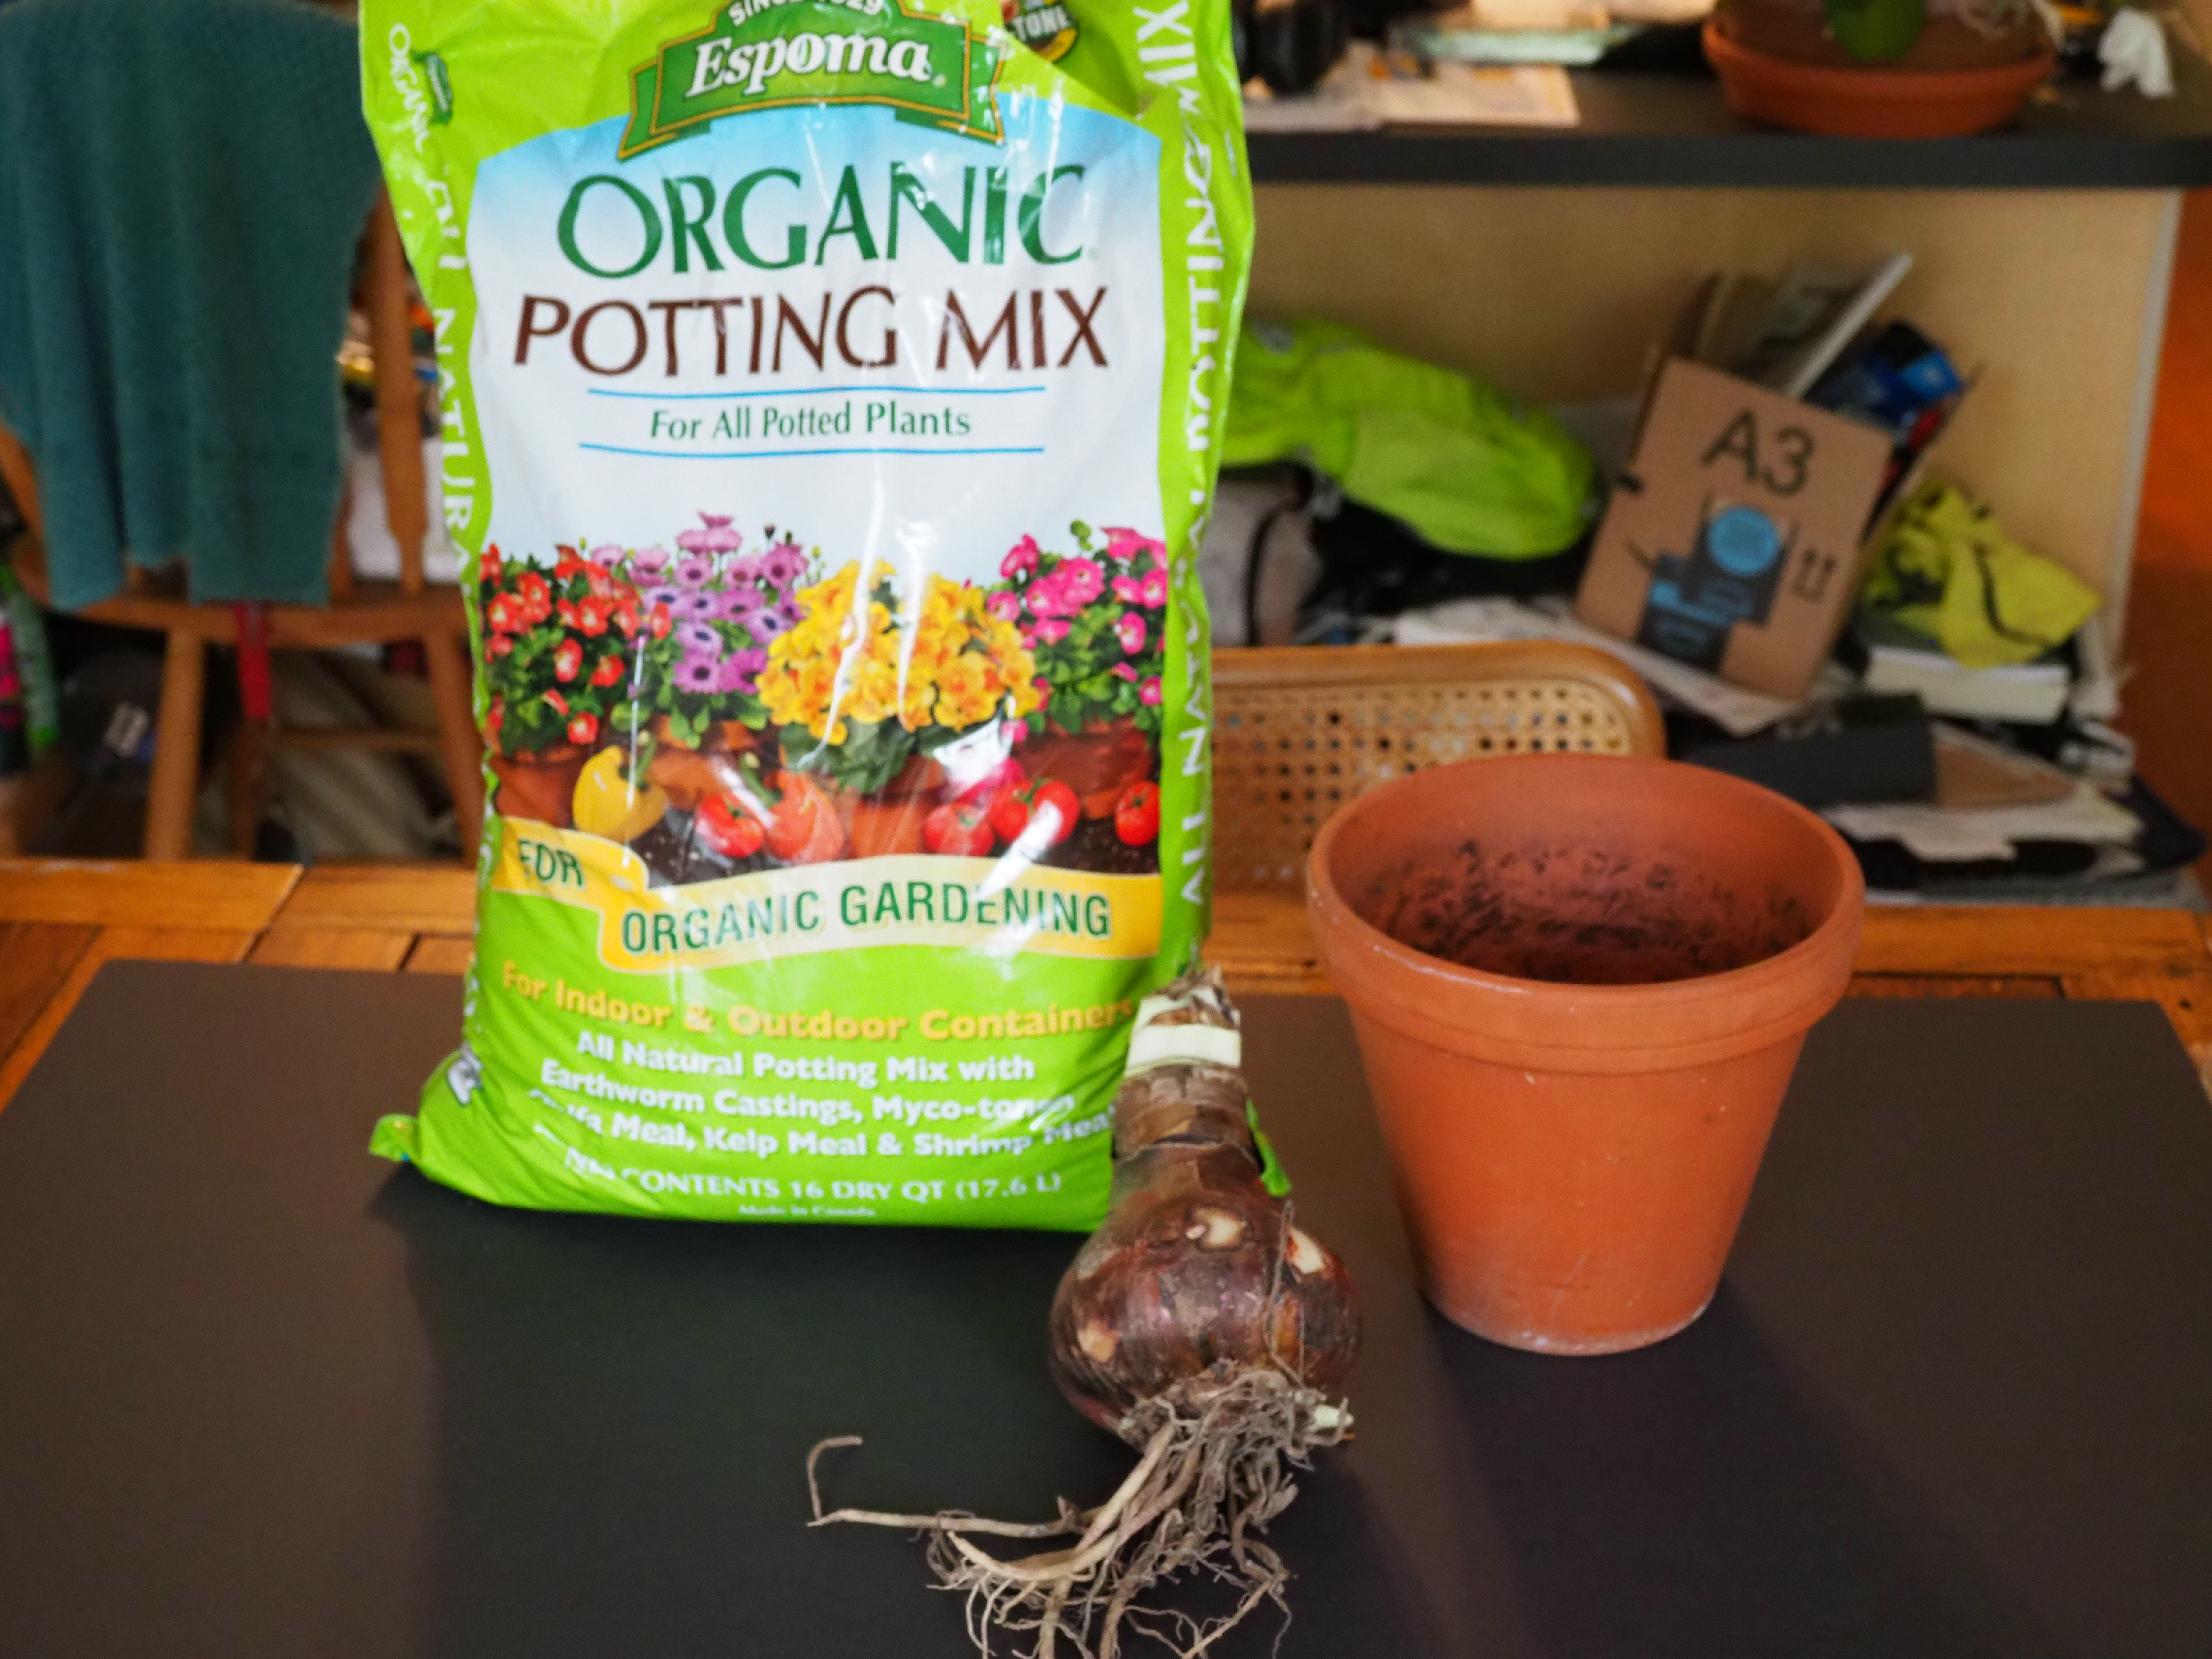 When potting an Amaryllis bulb use a brand-name peat-based potting soil, a clay pot to enhance drainage, and a top quality bulb. In this case the bulb is 5 inches in diameter and the pot is 7 inches in diameter. The pot diameter should not be more than 2 inches larger in diameter than the bulb. ANDREW MESSINGER